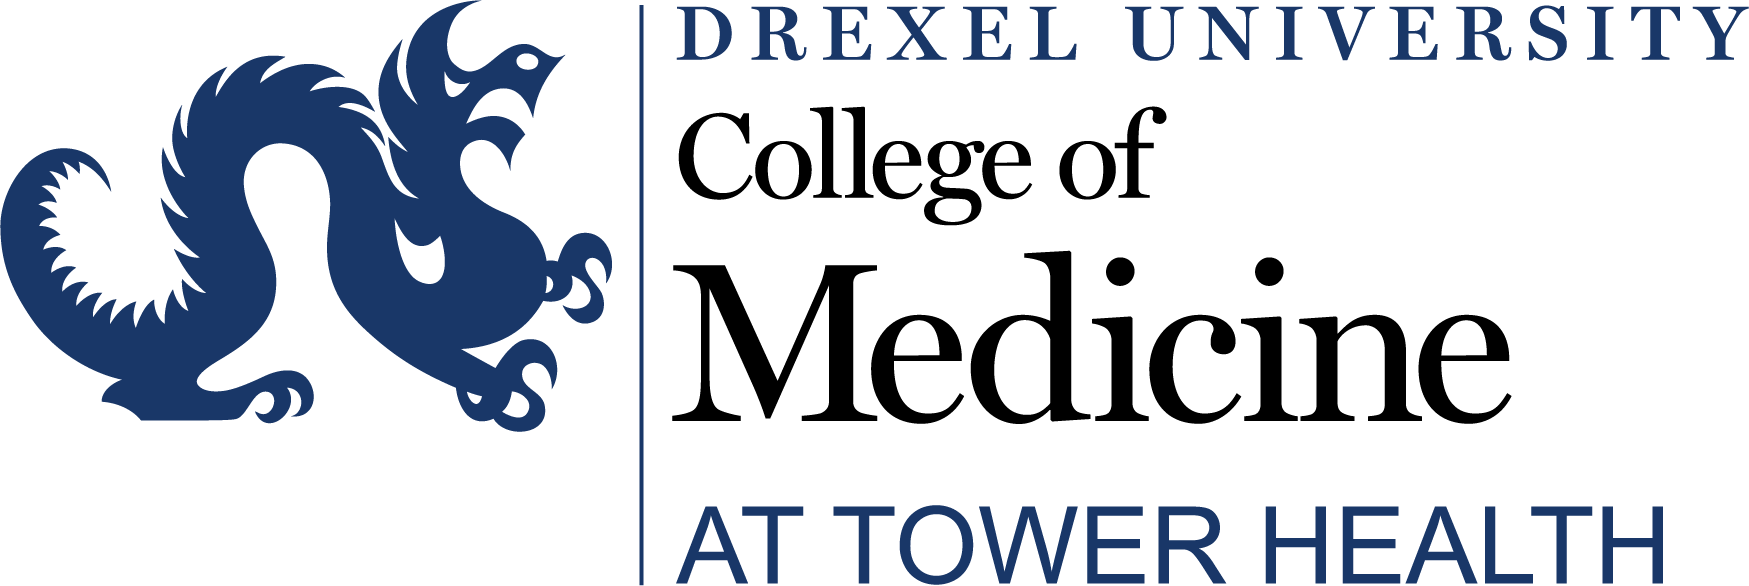 Drexel University College of Medicine at Tower Health